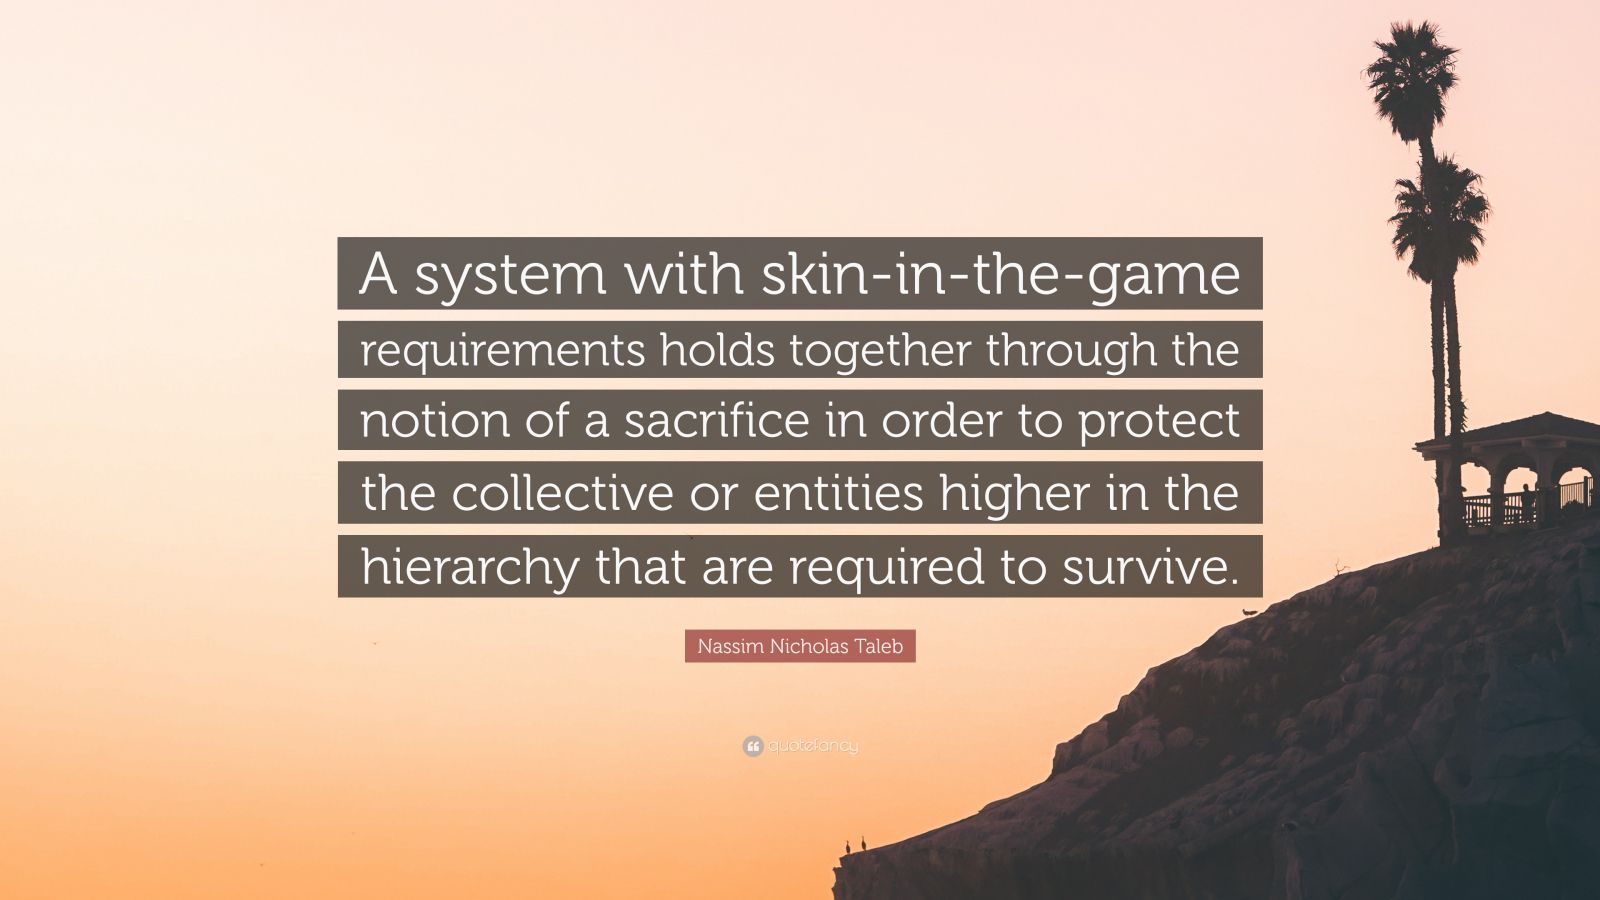 Nassim Nicholas Taleb Quote: “A system with skin-in-the-game